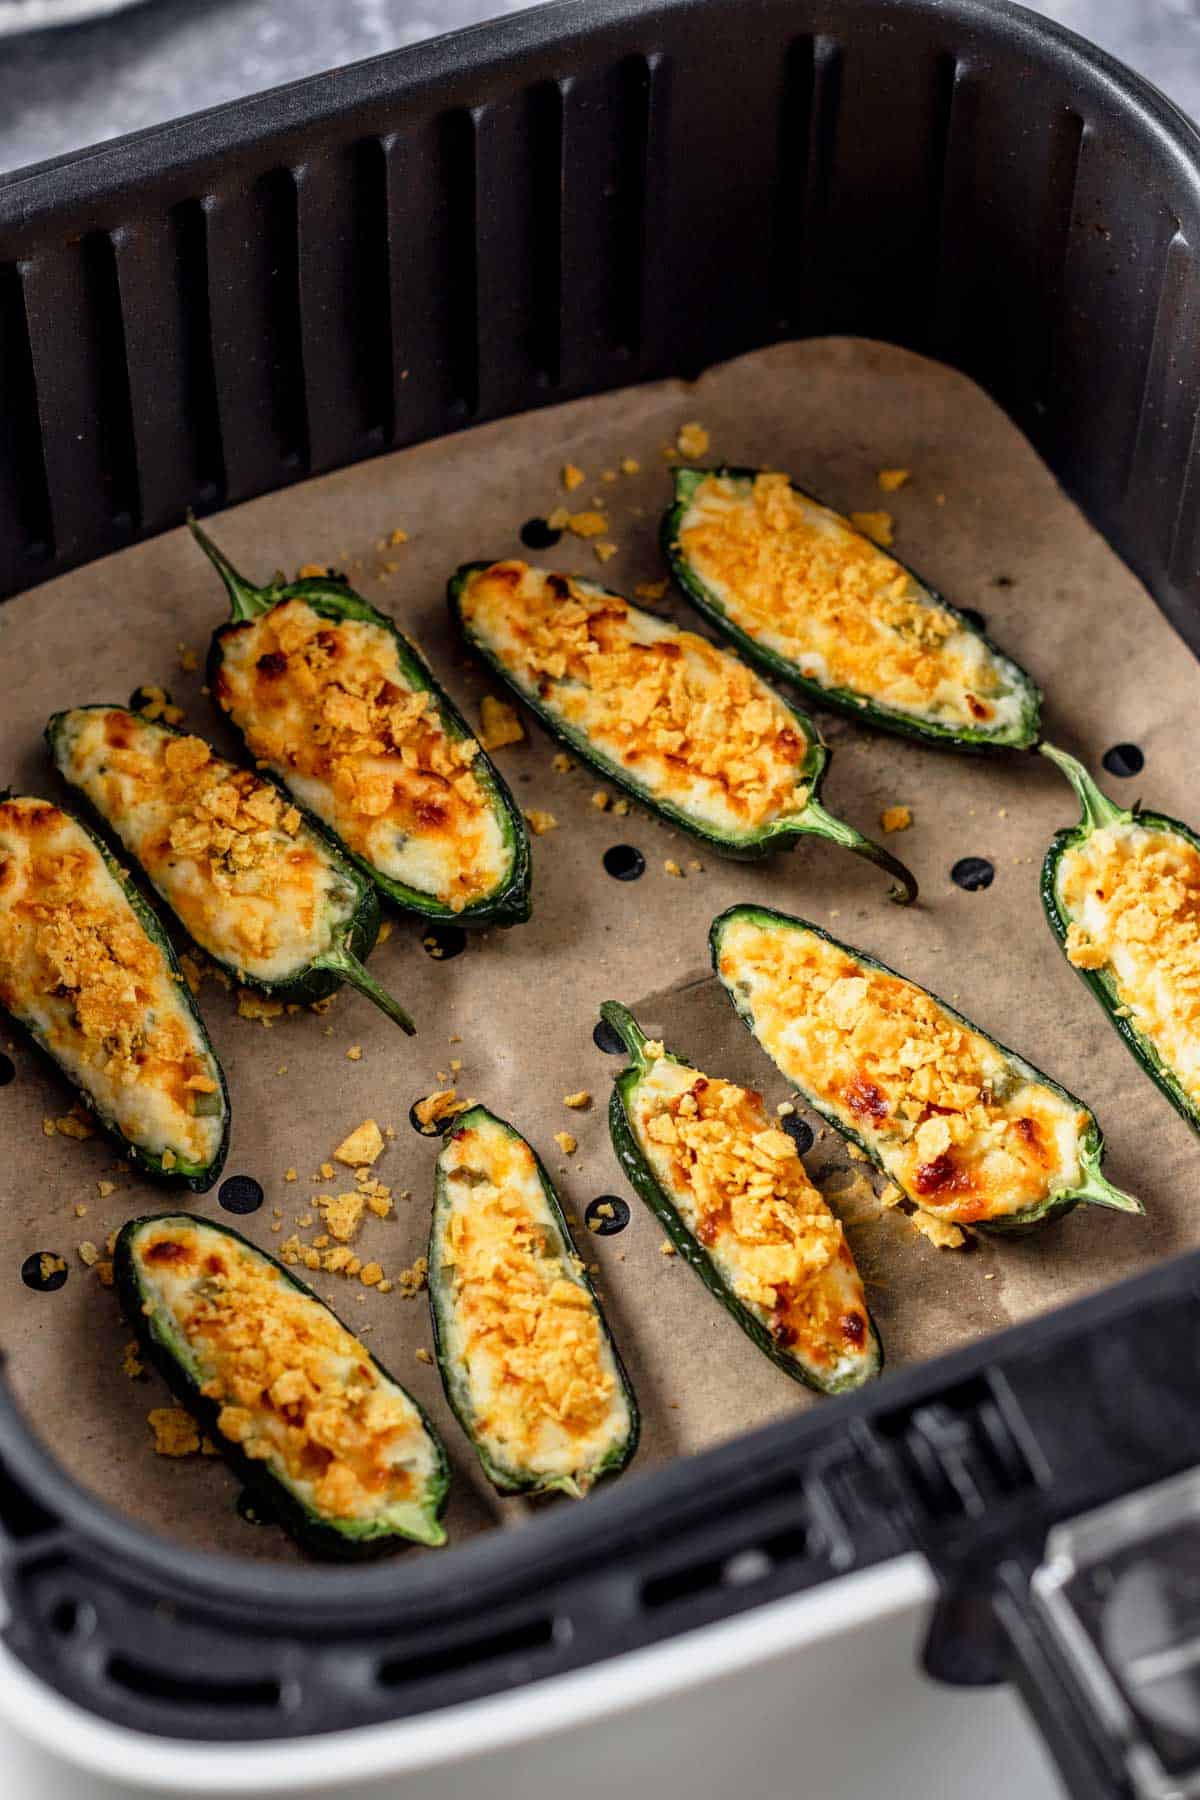 jalapeno poppers right after air frying